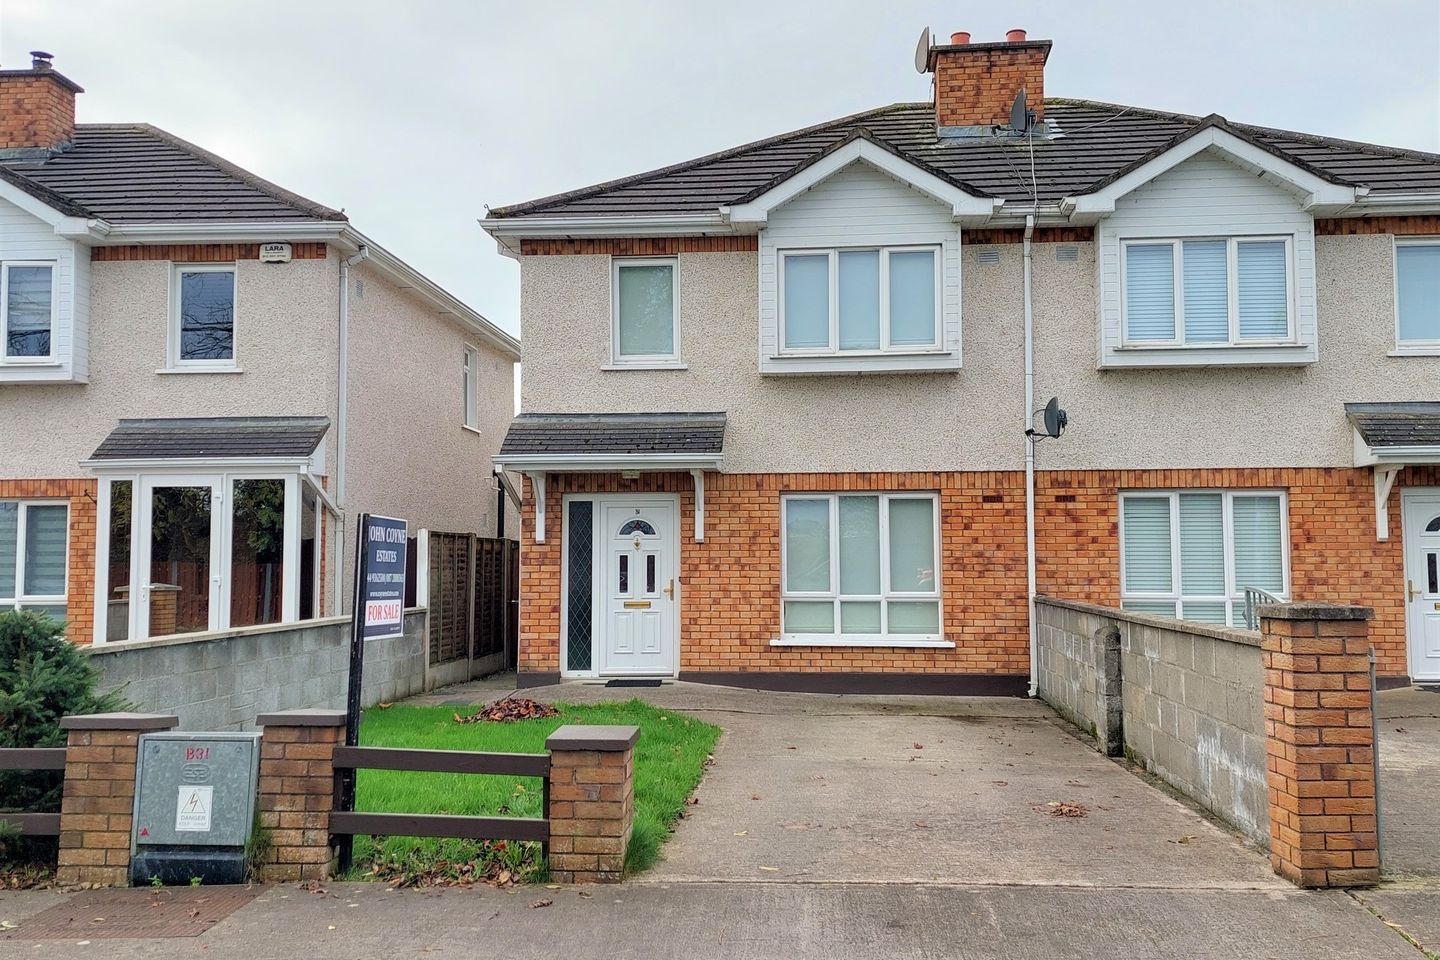 264 The Sycamores, Edenderry, Co. Offaly